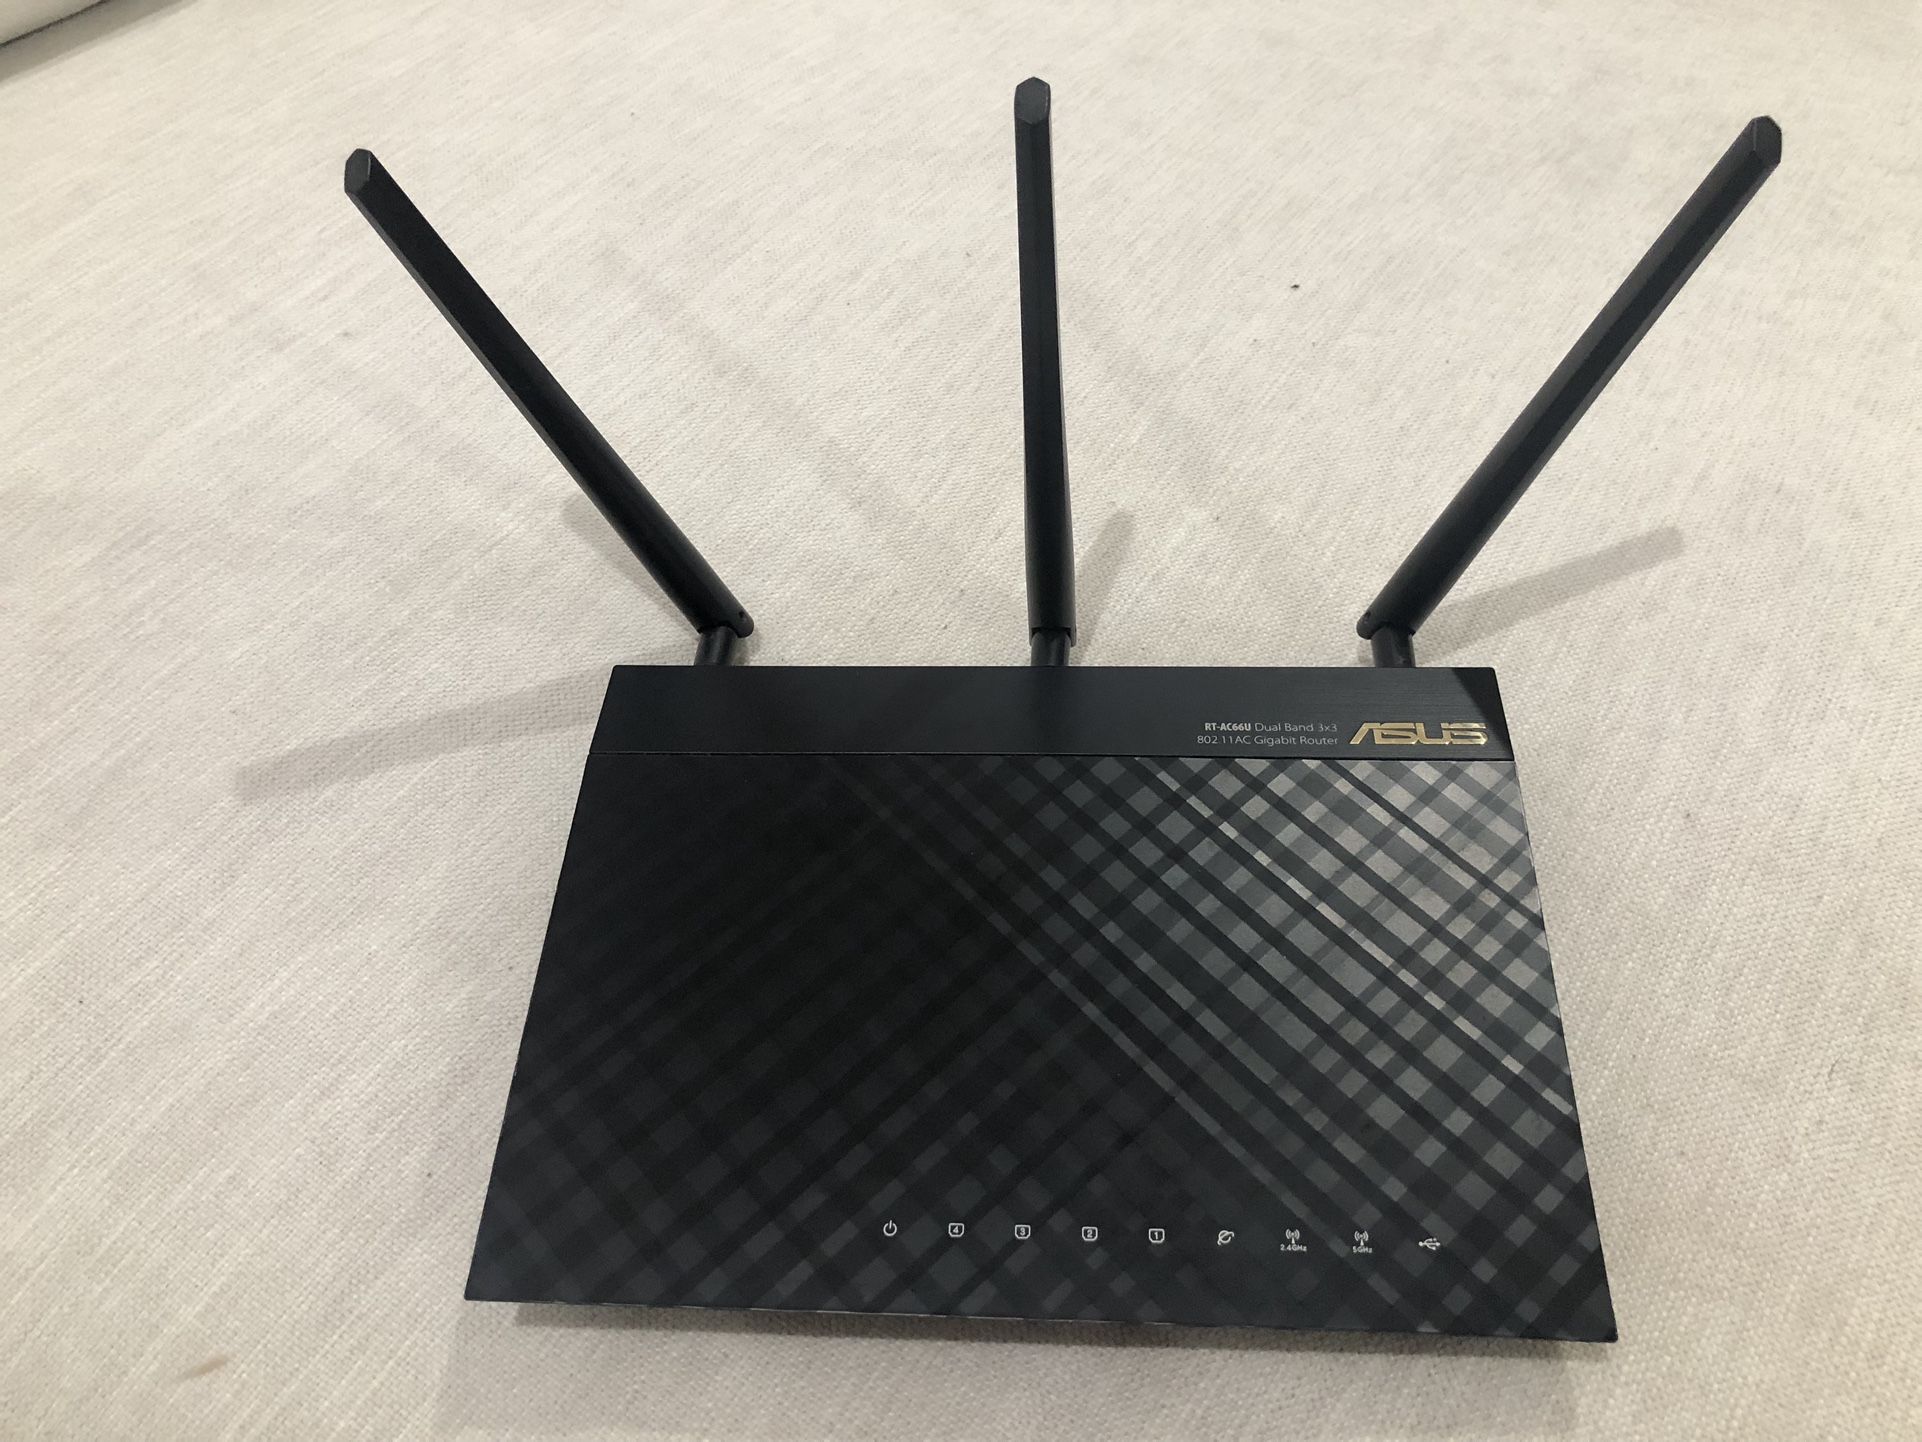 Asus WiFi Router RT-AC66U